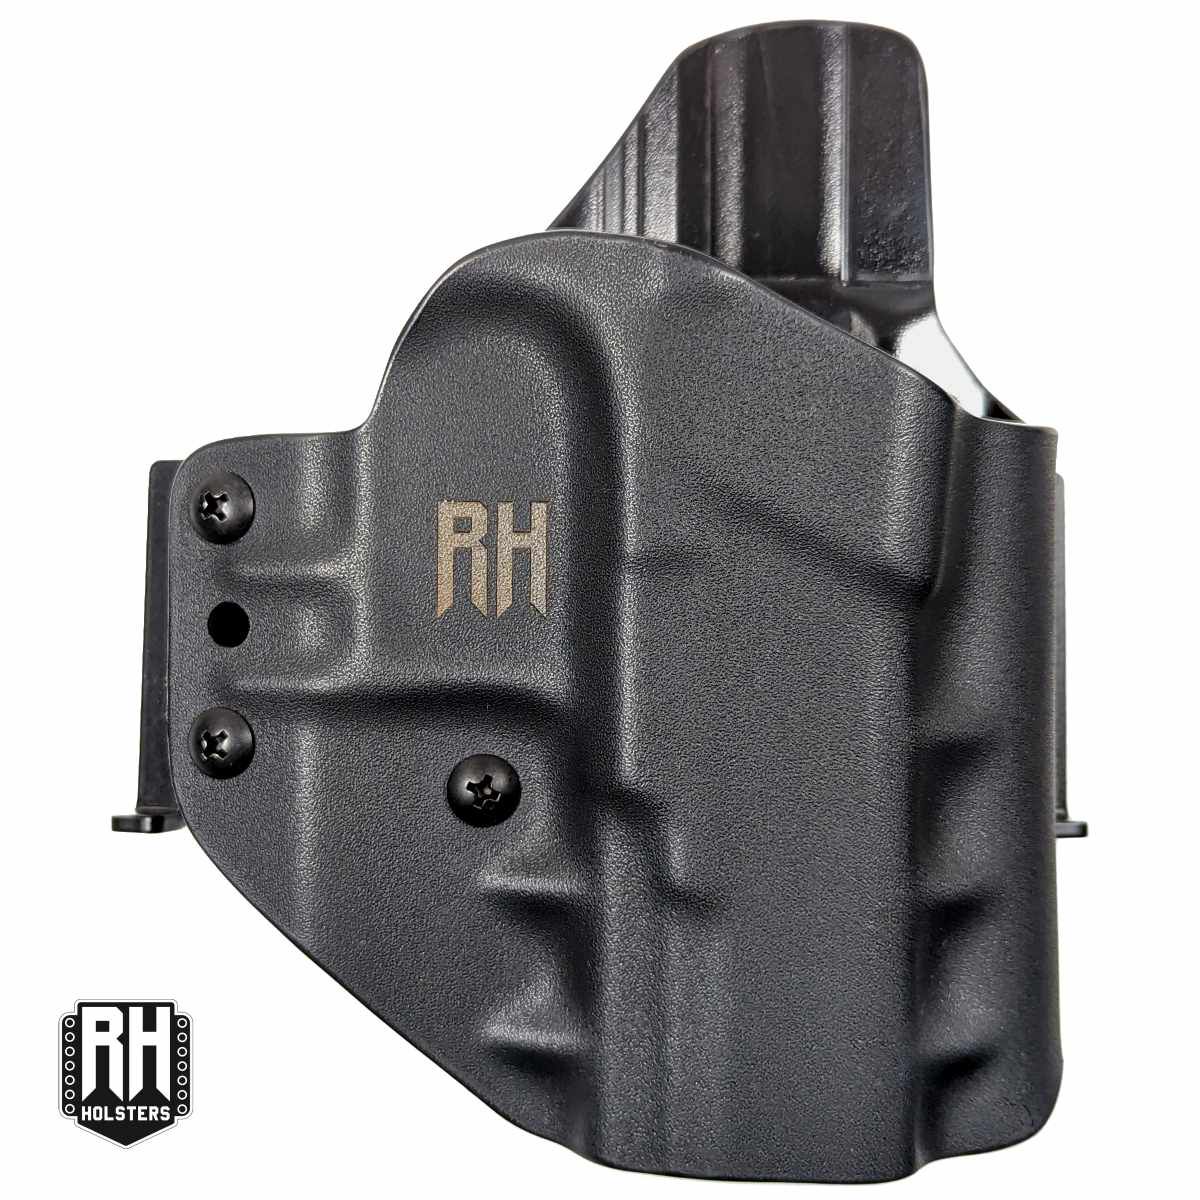 Pouzdro RH Holsters Sharky Walther PDP 4